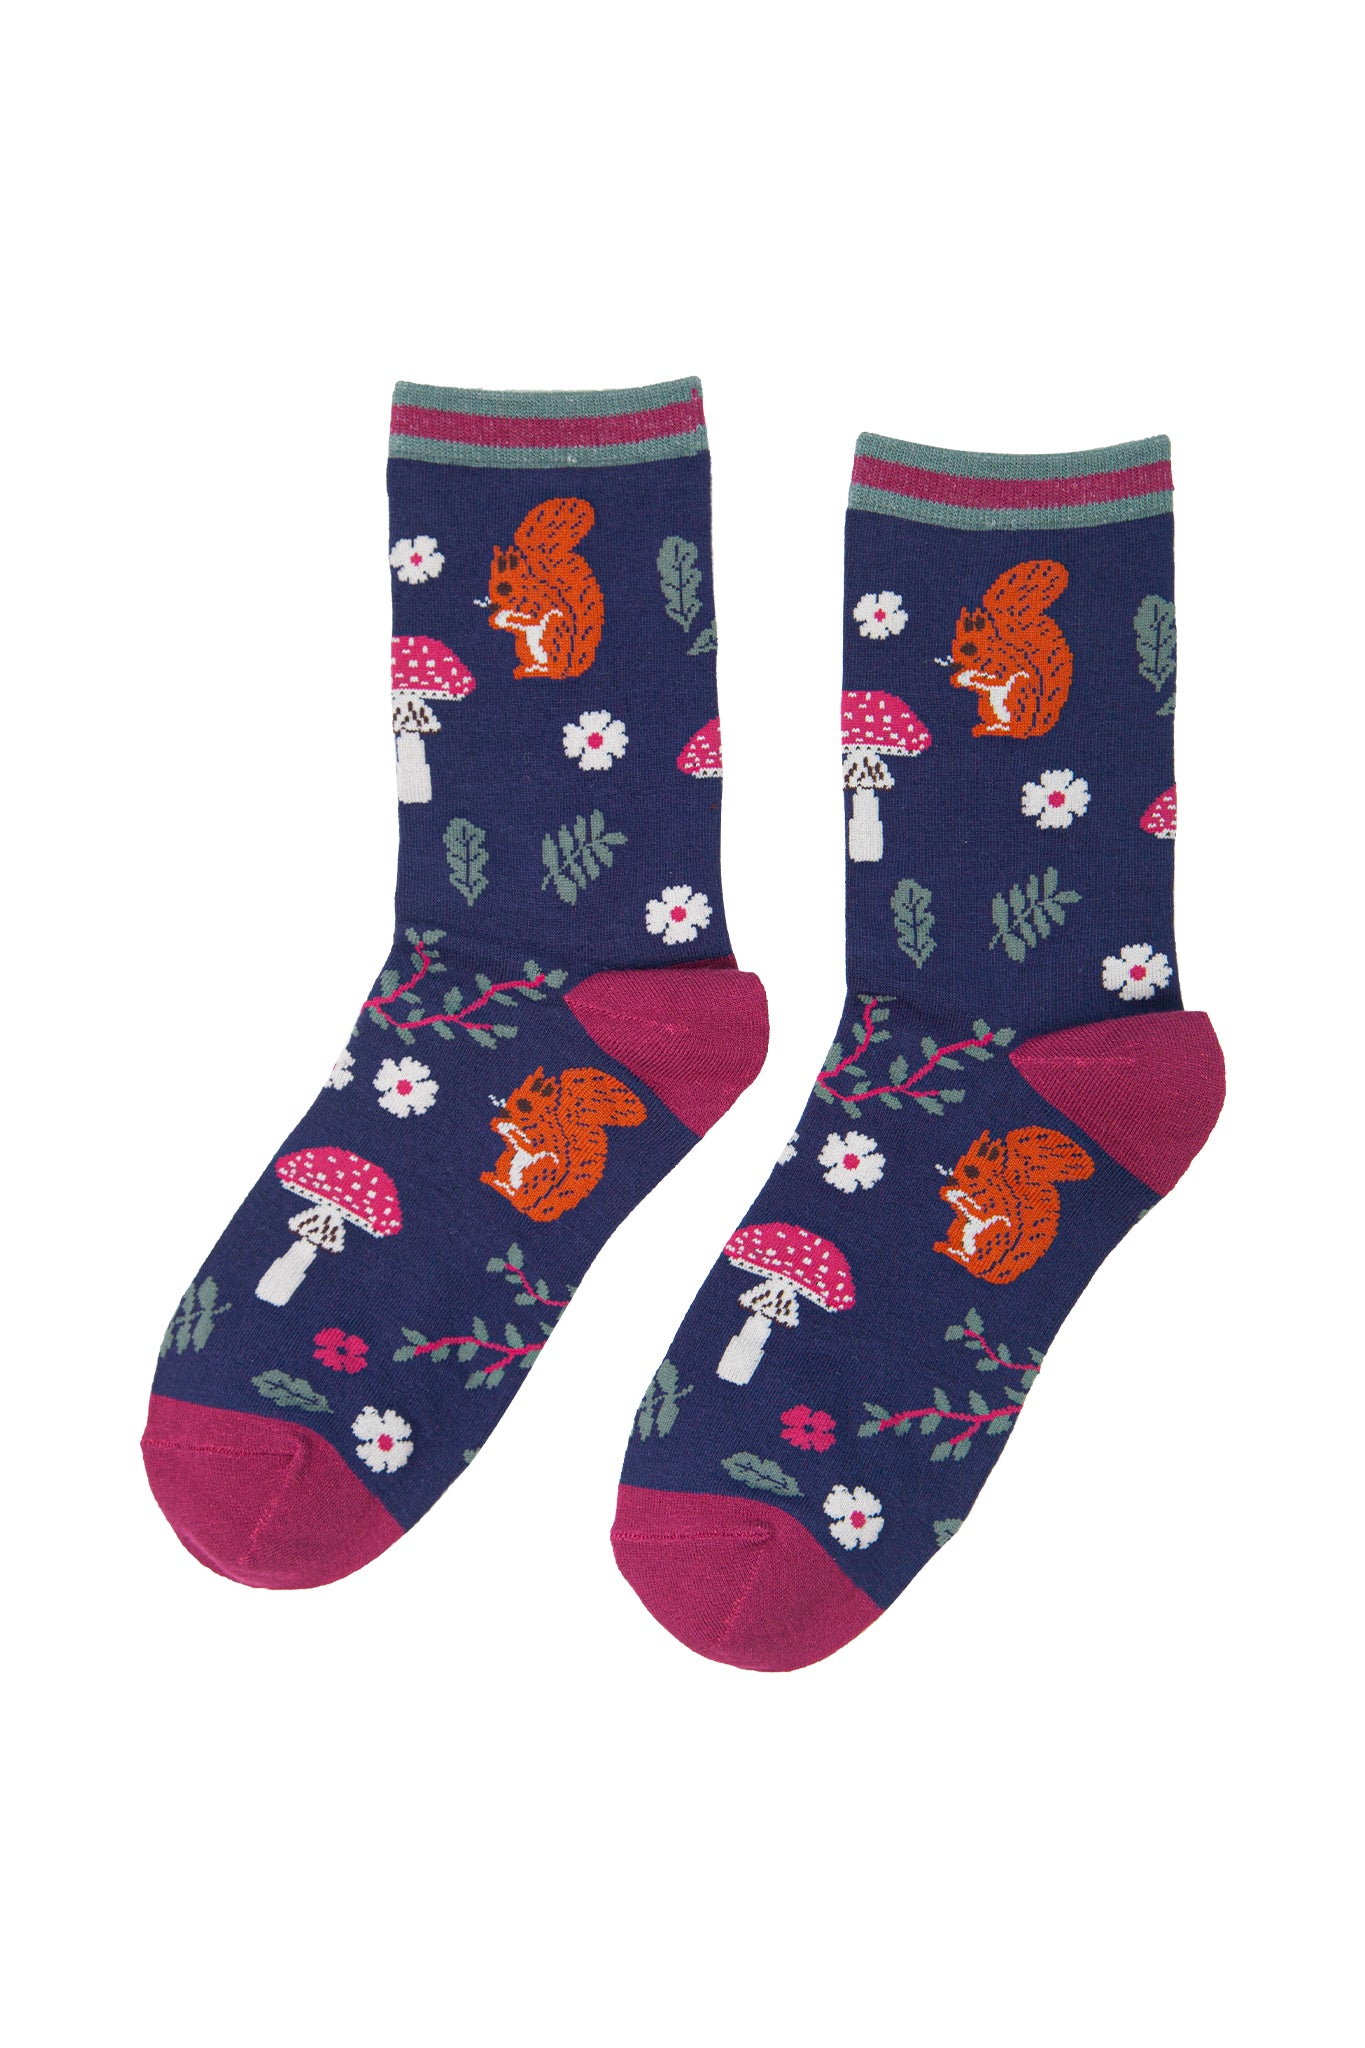 navy blue and pink ankle socks with squirrels, flowers, leaves and toadstools